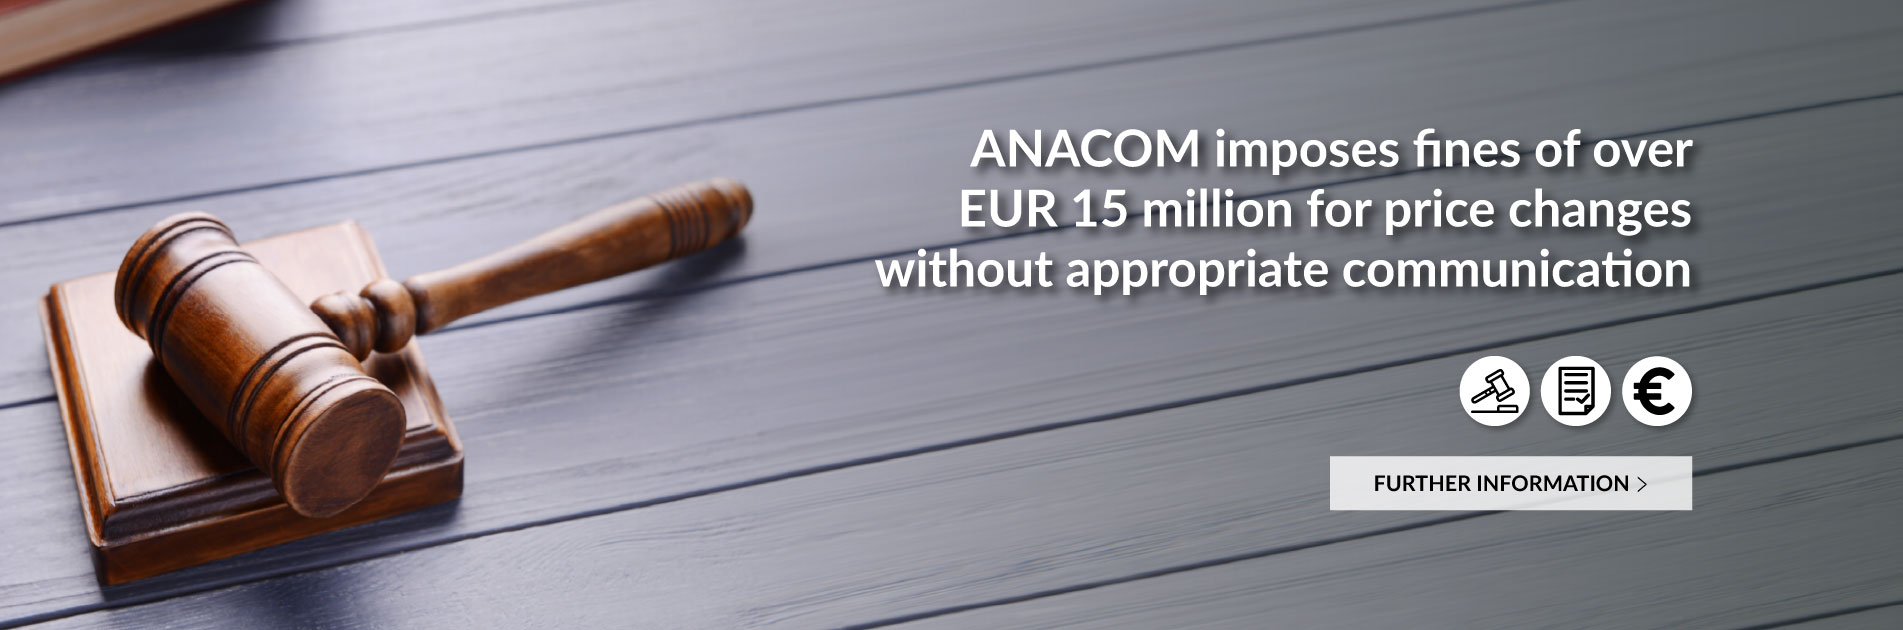 ANACOM imposes fines of over EUR 15 million for price changes without appropriate communication